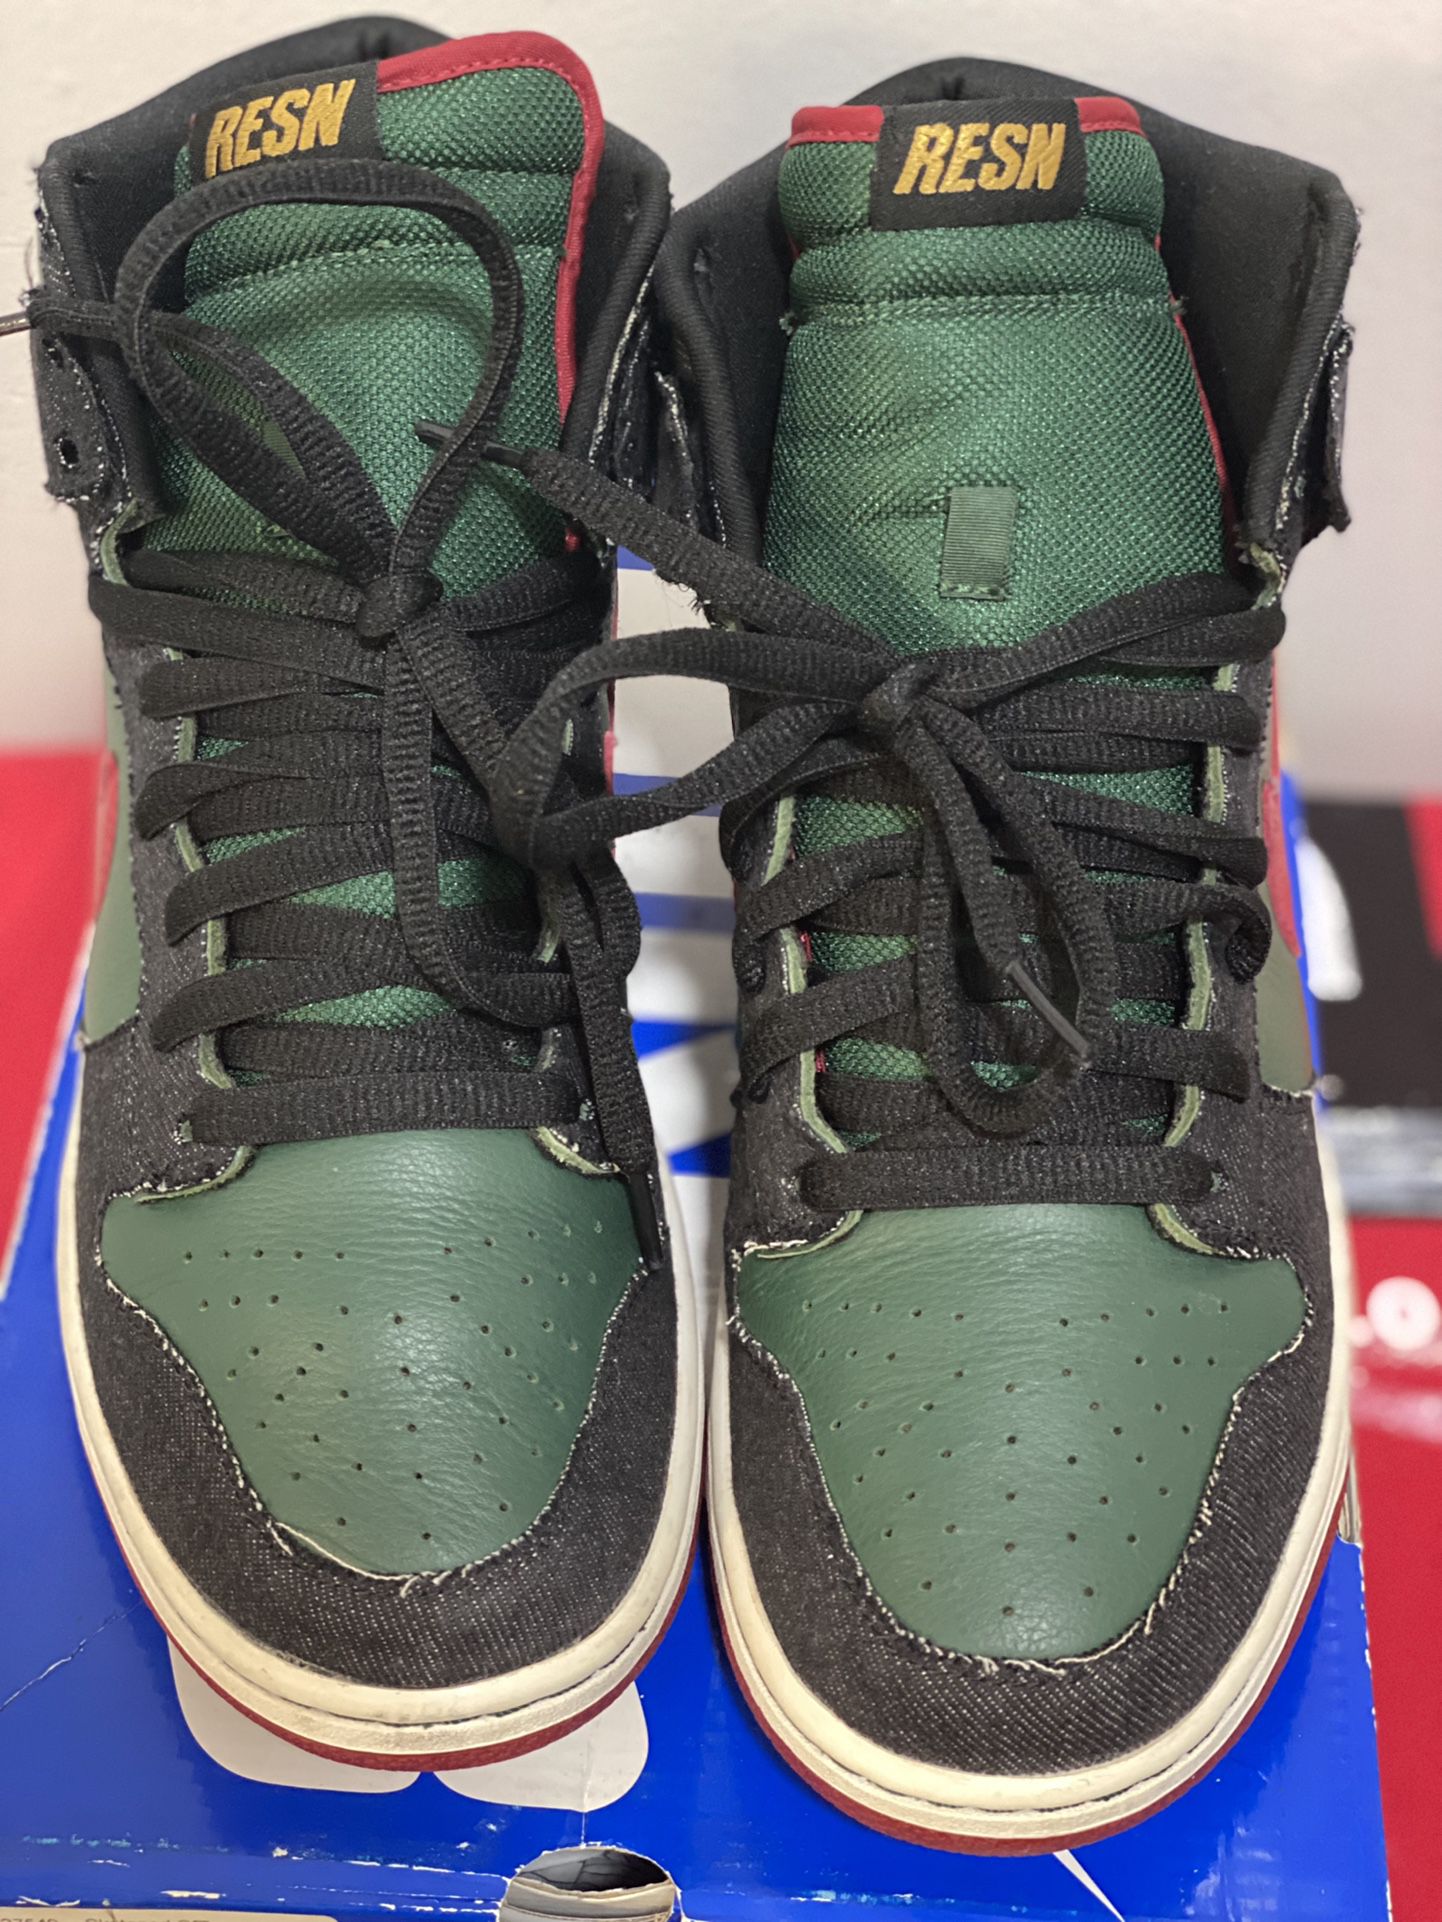 Nike Dunk Sb High “Gucci/RESN” Sz 10.5 $230 Obo NO TRADES! for Sale in News, VA - OfferUp